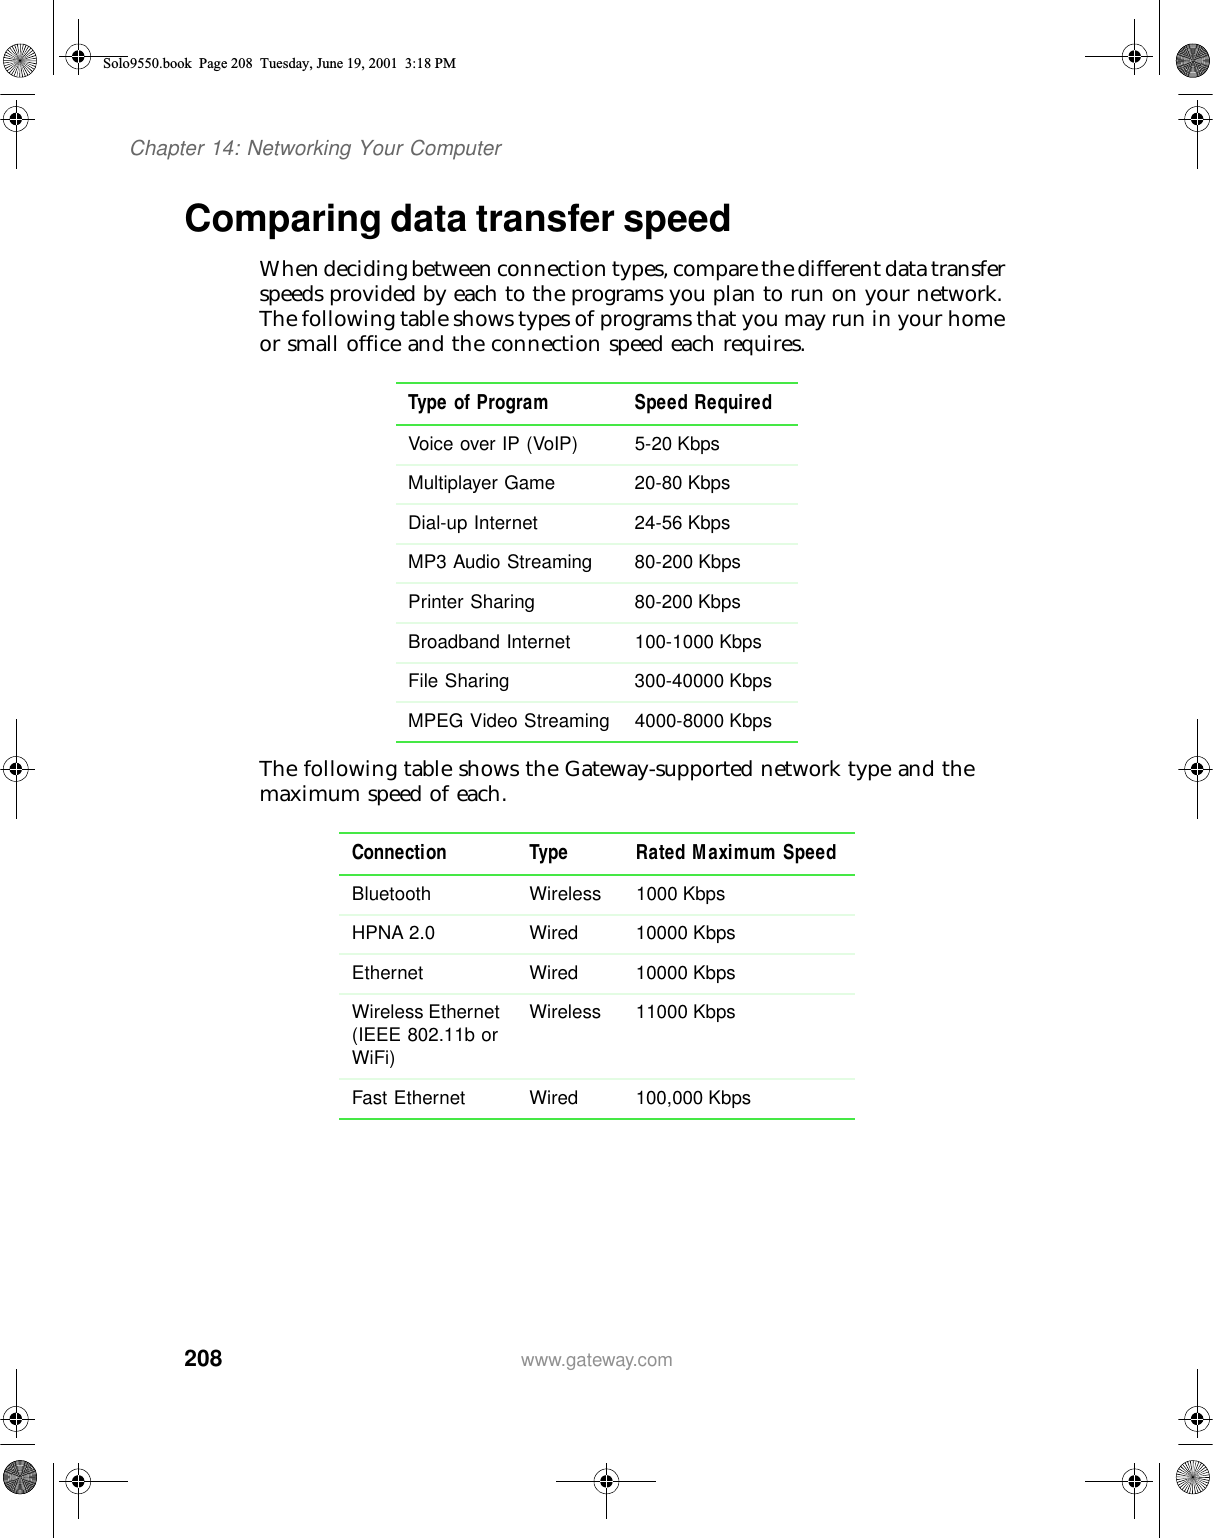 208Chapter 14: Networking Your Computerwww.gateway.comComparing data transfer speedWhen deciding between connection types, compare the different data transfer speeds provided by each to the programs you plan to run on your network. The following table shows types of programs that you may run in your home or small office and the connection speed each requires.The following table shows the Gateway-supported network type and the maximum speed of each.Type of Program Speed RequiredVoice over IP (VoIP) 5-20 KbpsMultiplayer Game 20-80 KbpsDial-up Internet 24-56 KbpsMP3 Audio Streaming 80-200 KbpsPrinter Sharing 80-200 KbpsBroadband Internet 100-1000 KbpsFile Sharing 300-40000 KbpsMPEG Video Streaming 4000-8000 KbpsConnection Type Rated Maximum SpeedBluetooth Wireless 1000 KbpsHPNA 2.0 Wired 10000 KbpsEthernet Wired 10000 KbpsWireless Ethernet (IEEE 802.11b or WiFi)Wireless 11000 KbpsFast Ethernet Wired 100,000 KbpsSolo9550.book Page 208 Tuesday, June 19, 2001 3:18 PM